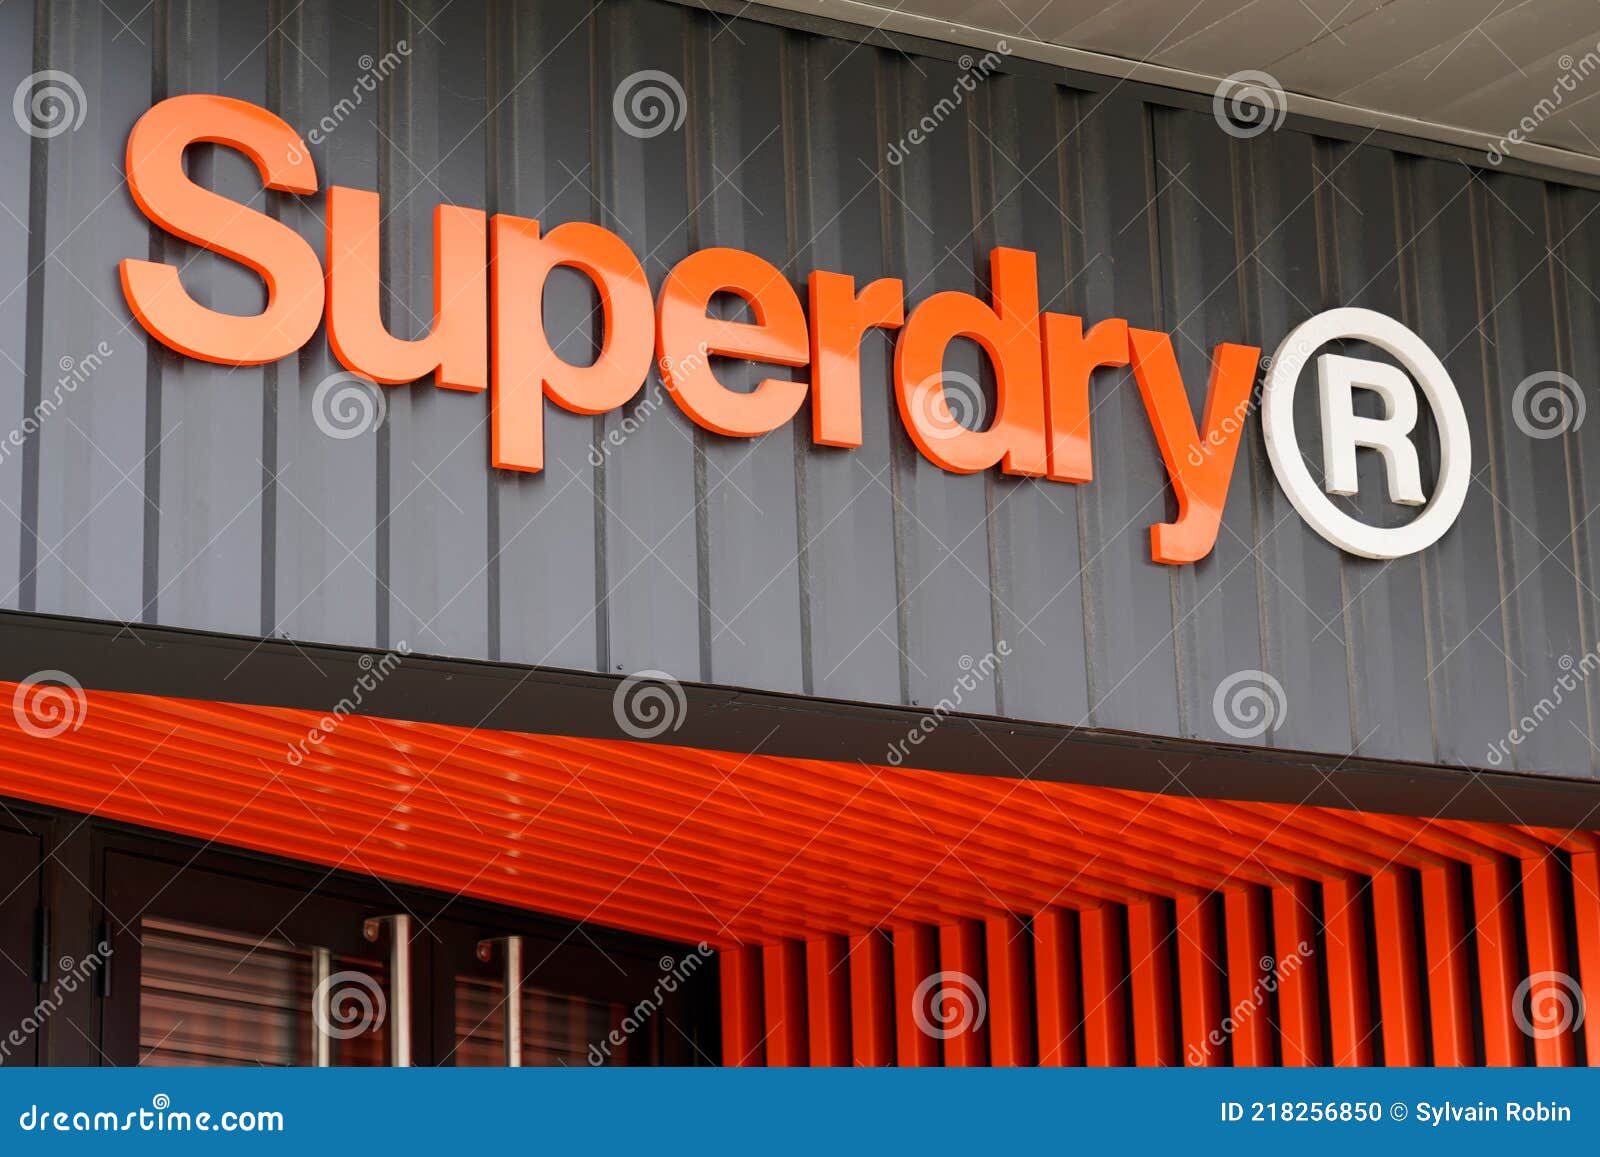 https://thumbs.dreamstime.com/z/bordeaux-aquitaine-france-superdry-logo-brand-orange-sign-text-store-british-fashion-clothing-company-chain-218256850.jpg